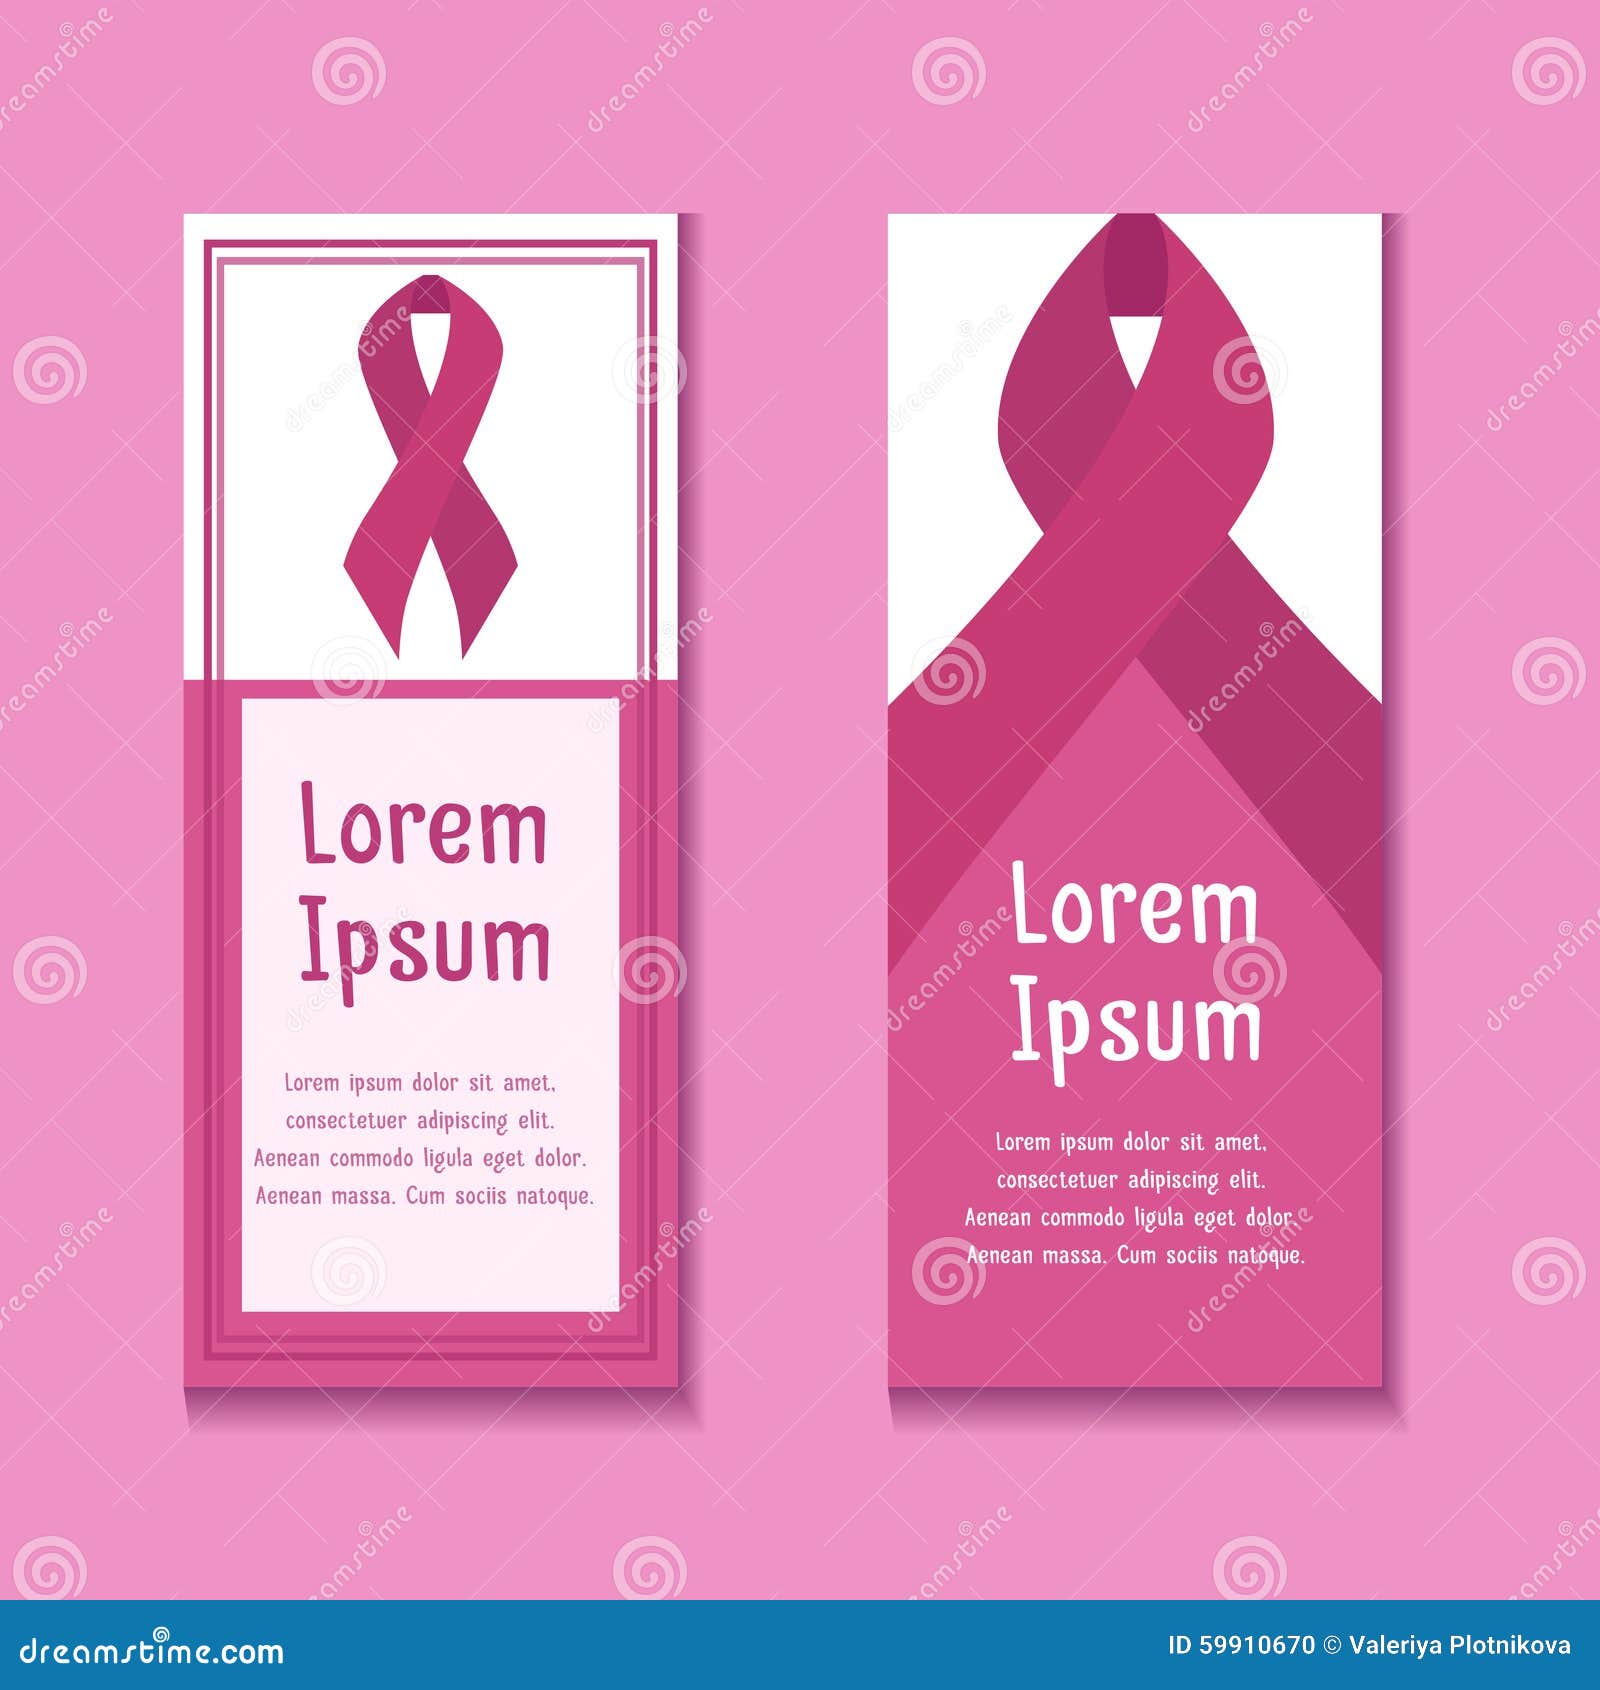 Set Of Templates Flyers On The Fight Against Breast Cancer Stock Vector Illustration Of Folder Cover 59910670